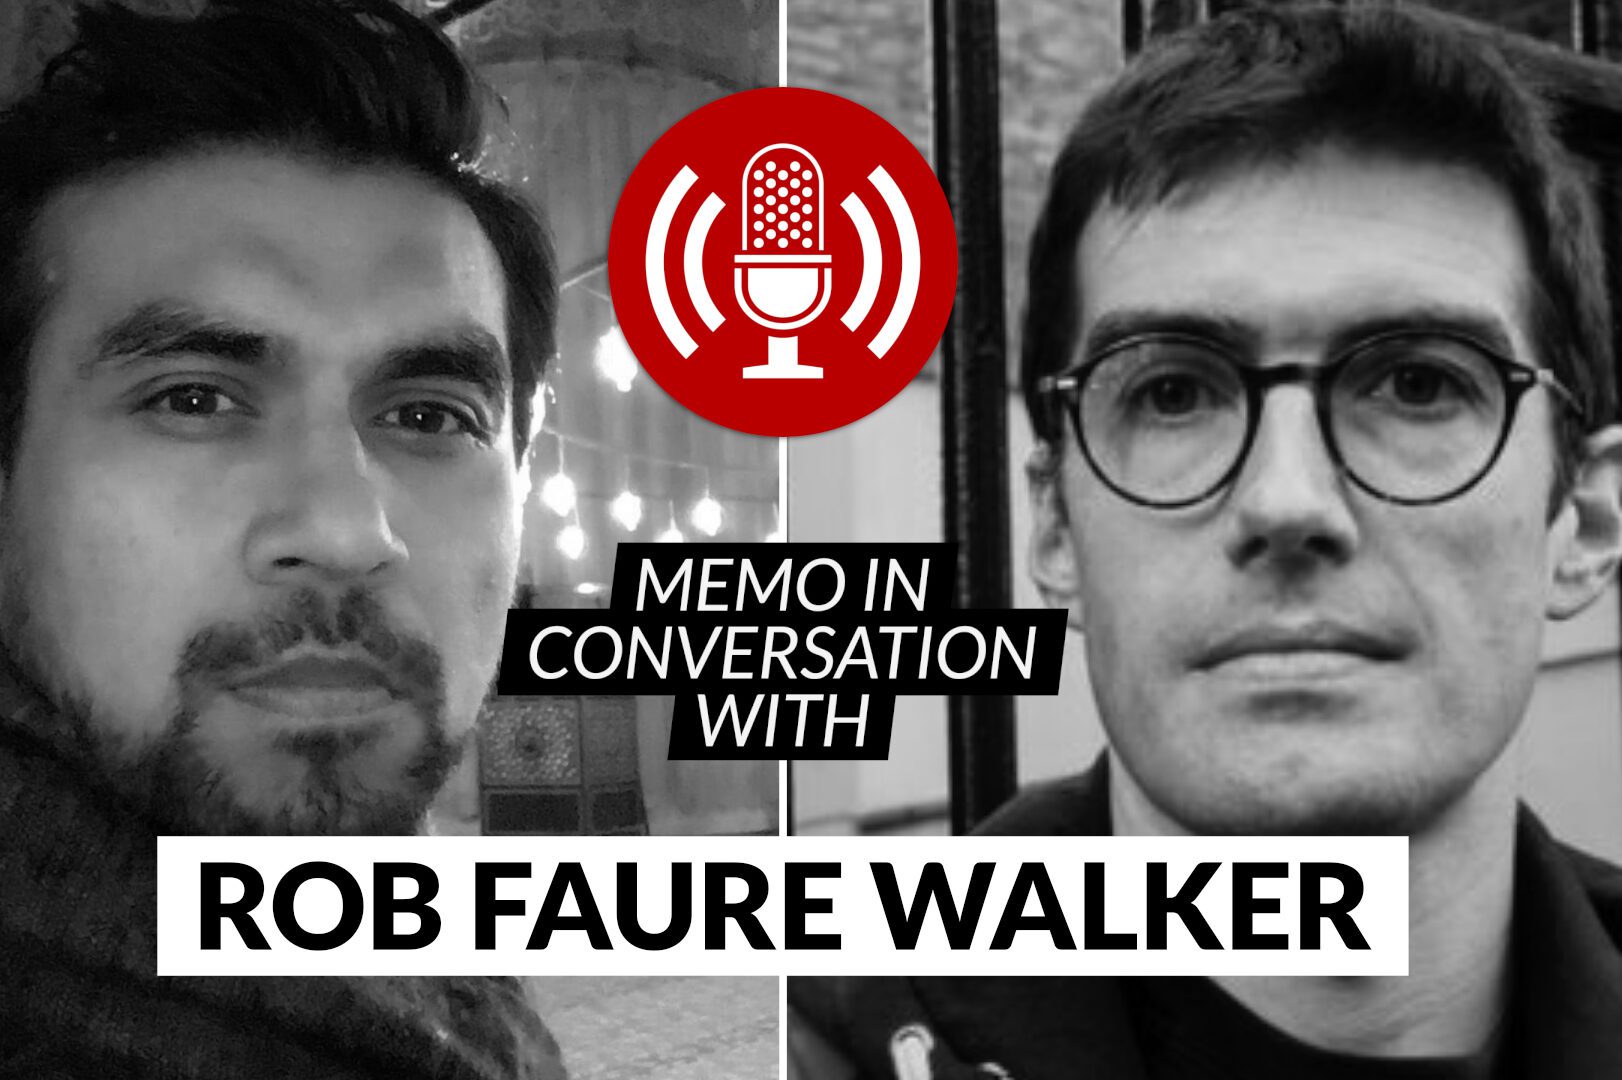 MEMO in conversation with Dr Rob Faure Walker